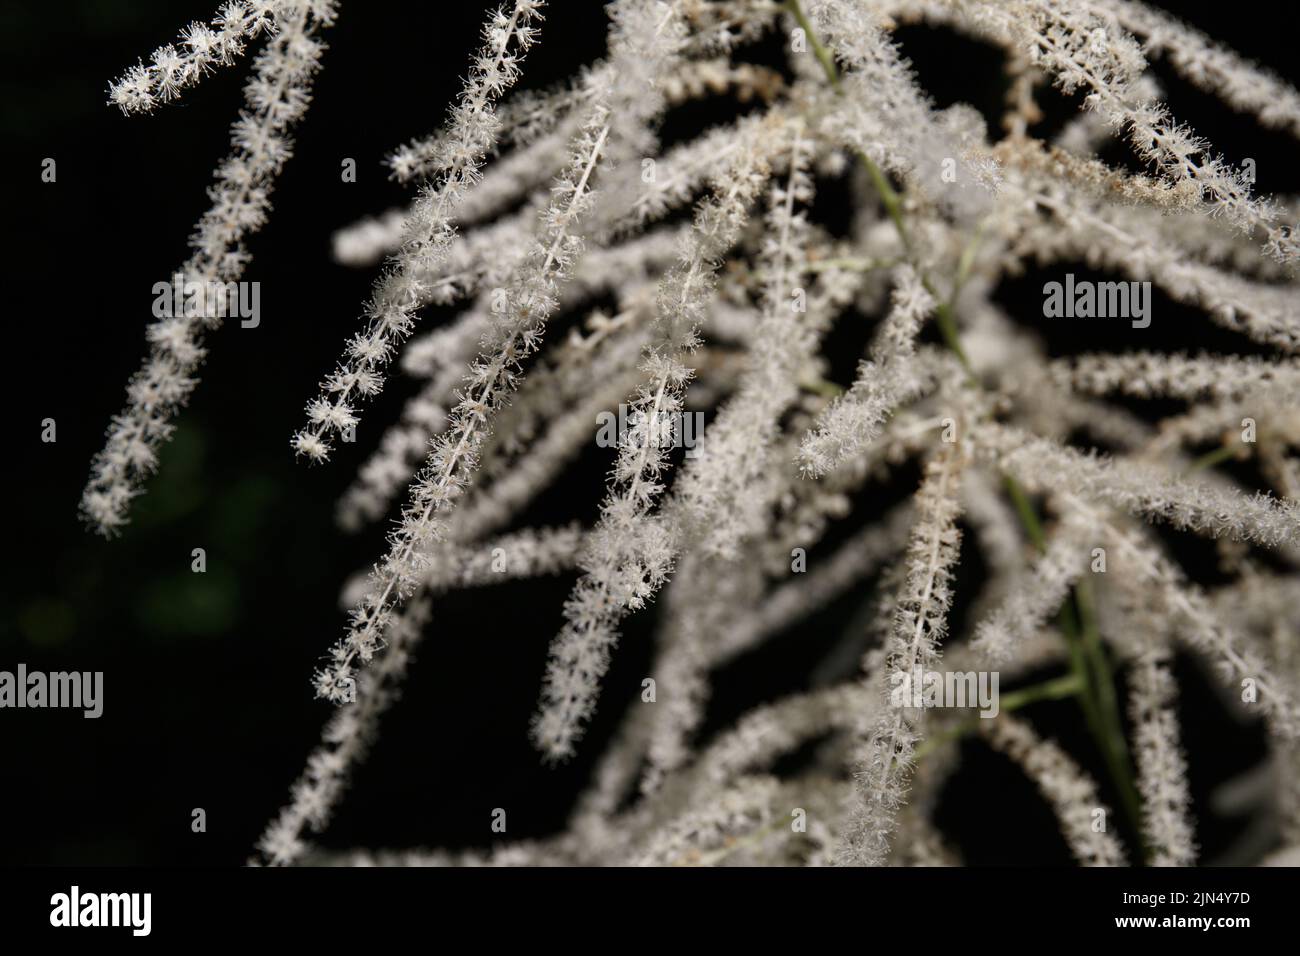 Aruncus dioicus, buck's-beard or bride's feathers, known as goat's beard, a flowering herbaceous perennial plant. selective focus Stock Photo